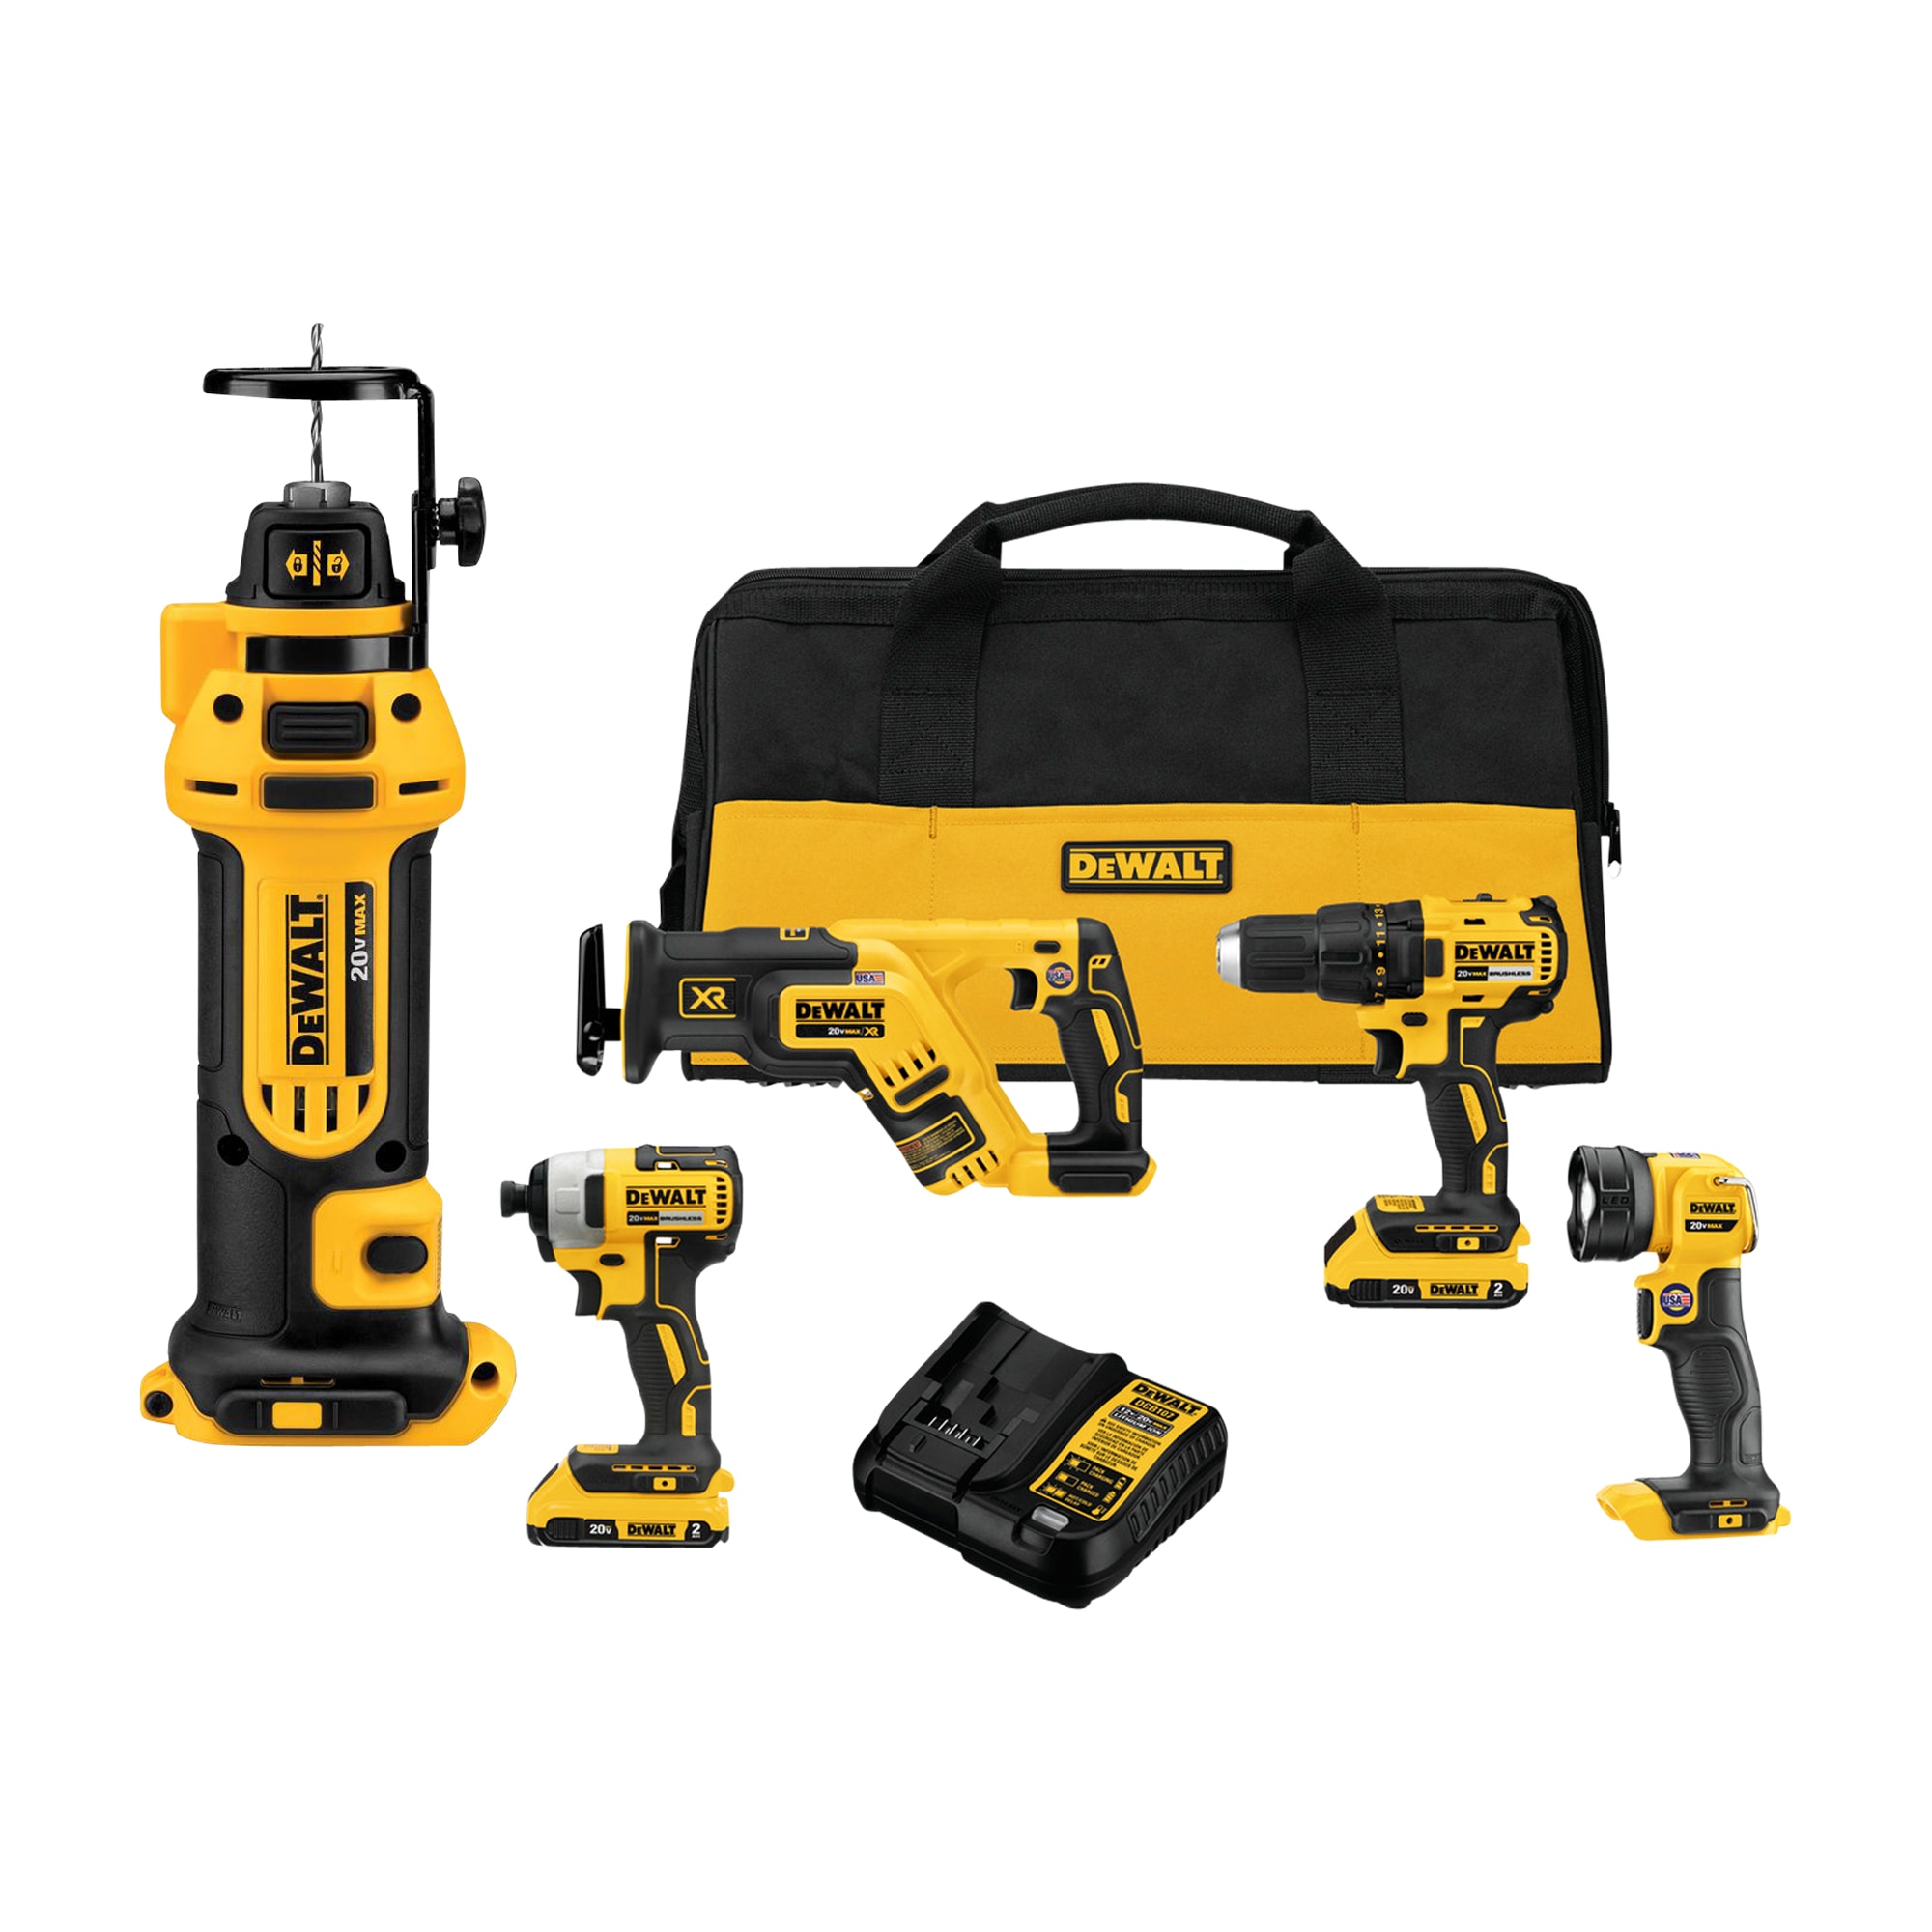 Shop DEWALT 1-Speed Cordless 20-Volt Max Cutting Rotary Tool & 4-Tool 20-Volt Max Brushless Power Tool Combo Kit with Case (2-Batteries and charger Included) at Lowes.com